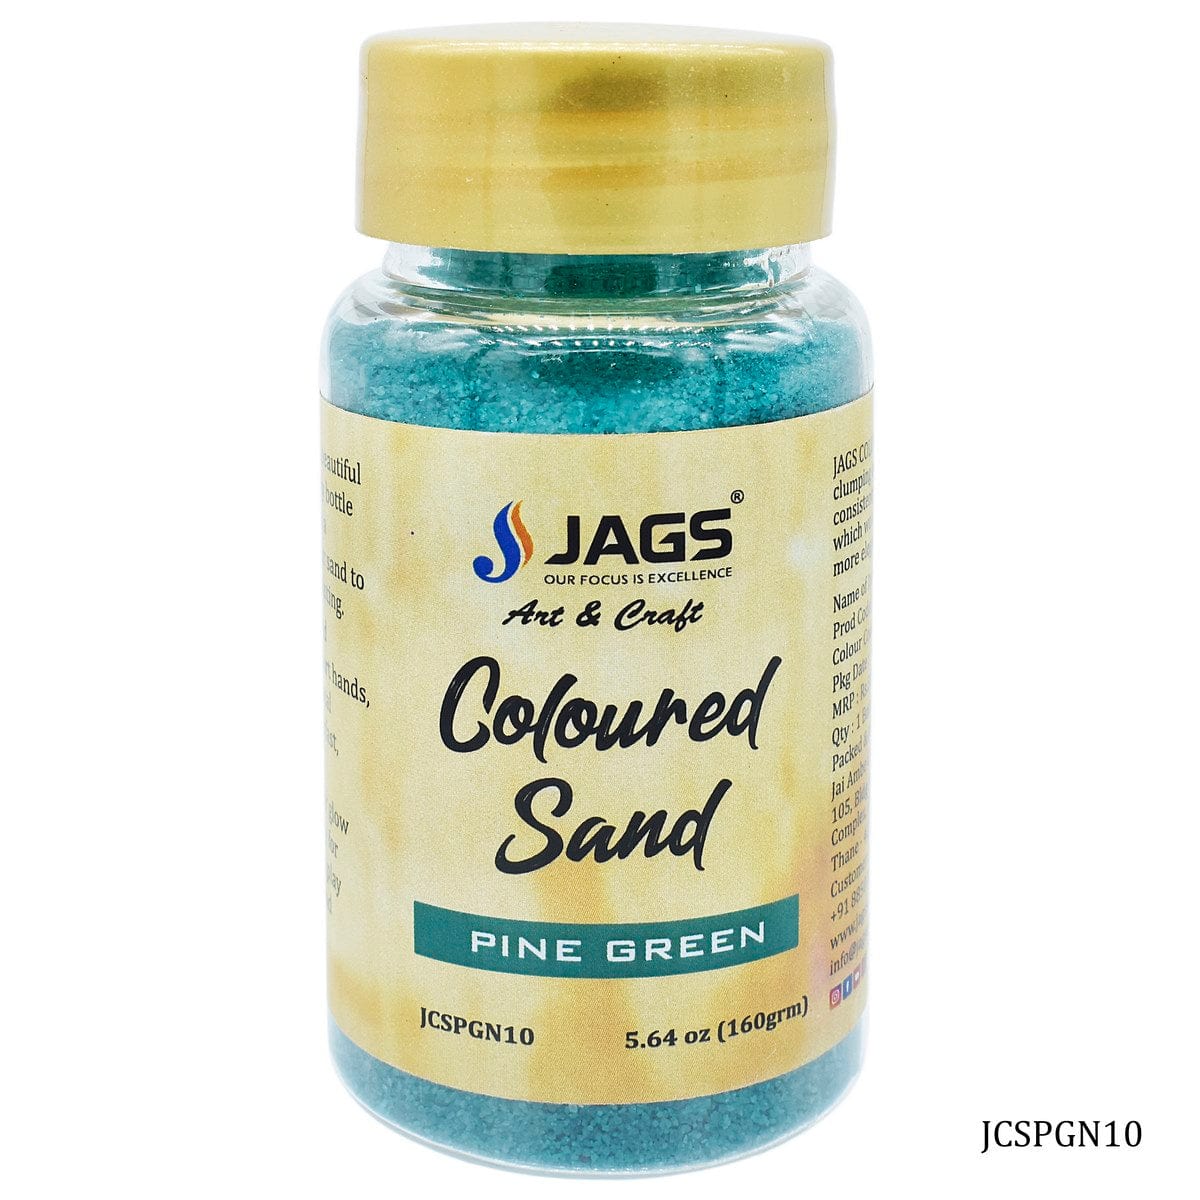 jags-mumbai Sand Add a Splash of Color to Your Crafts with Jags Coloured Sand 160 Gms PineGreen No10 JCSPGN10"